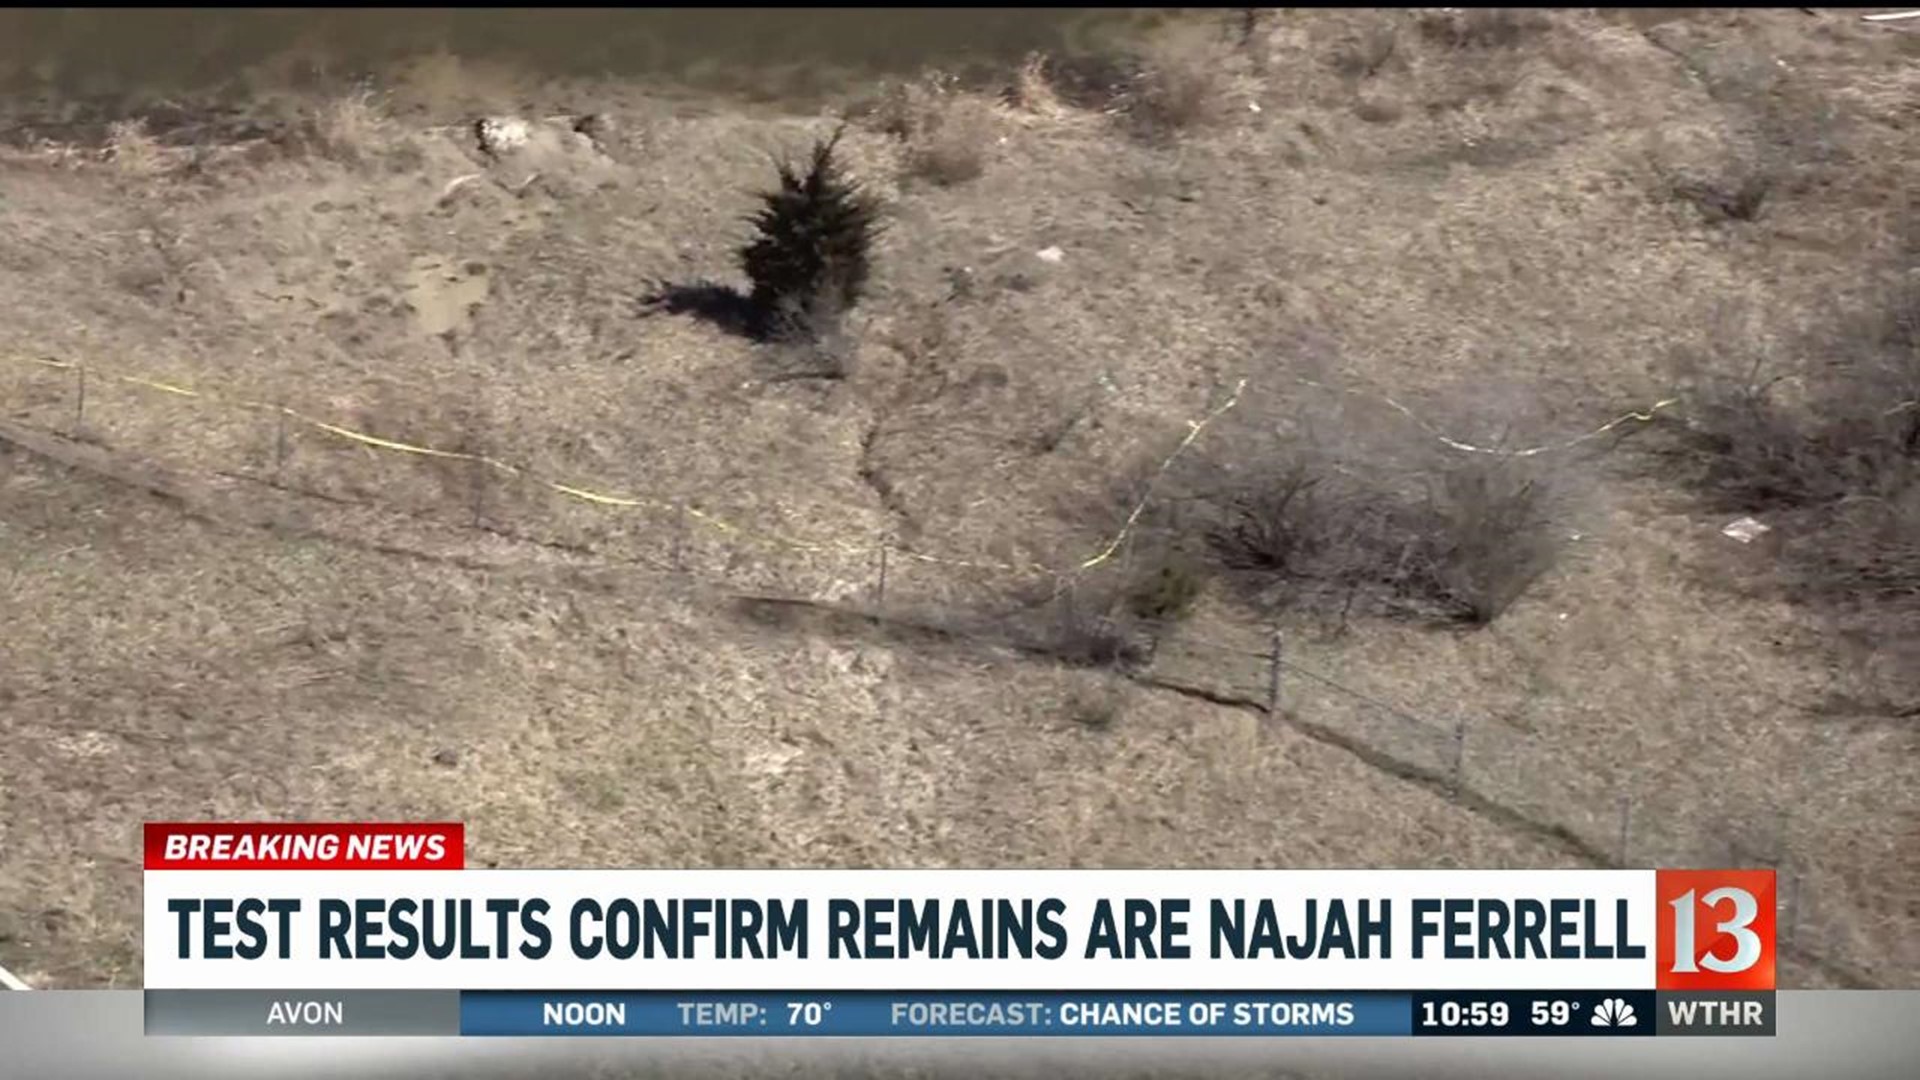 DNA results confirm remains are Najah Ferrell